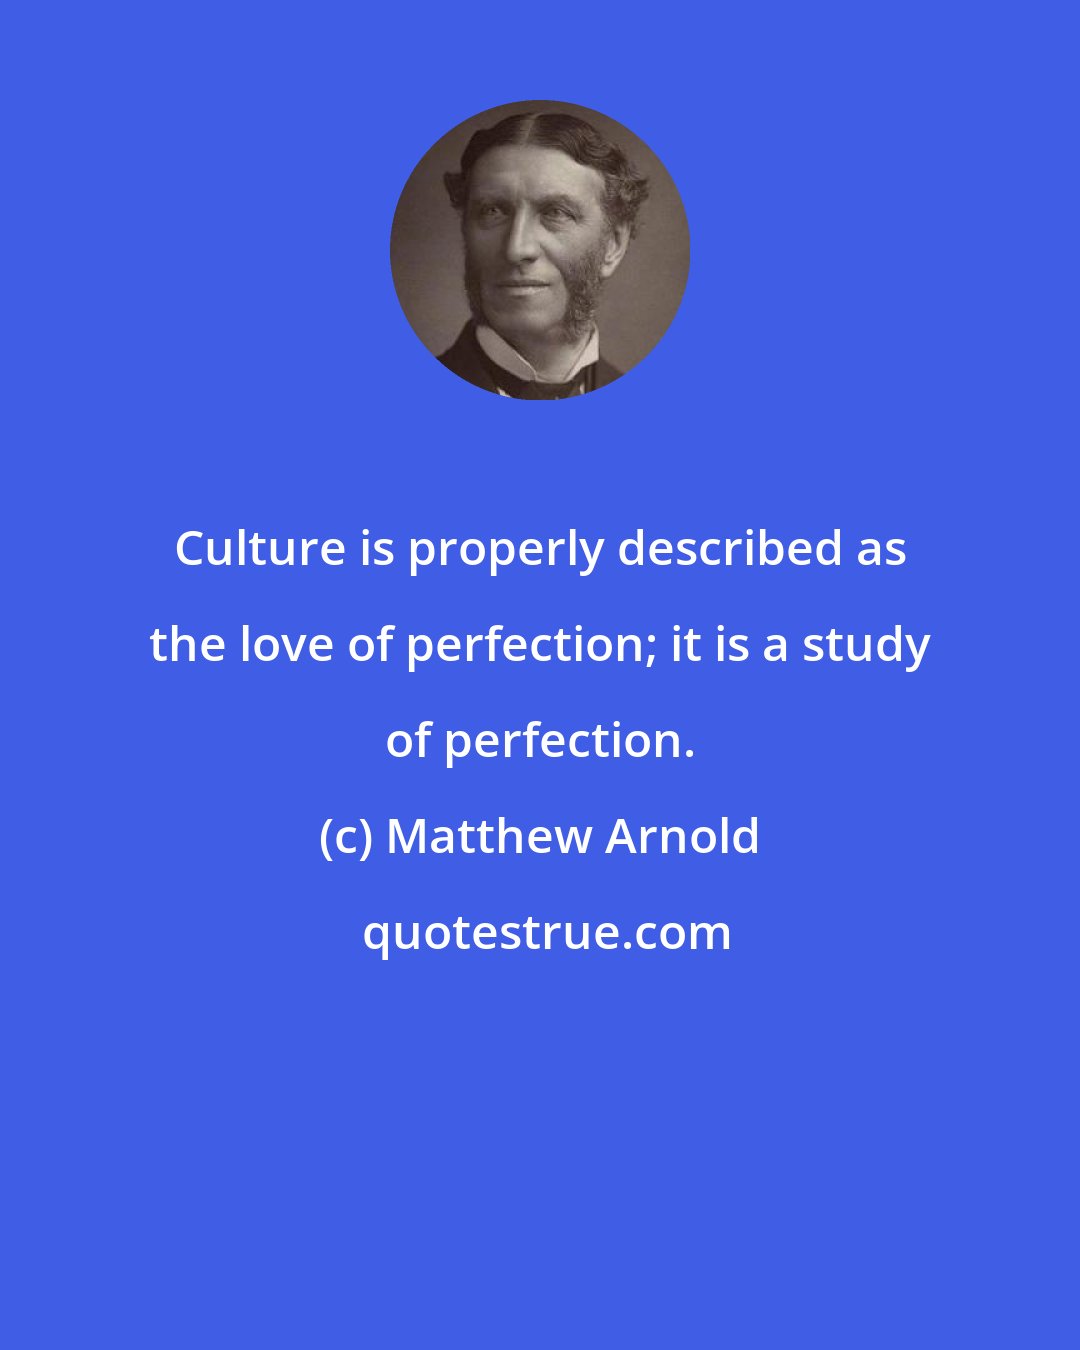 Matthew Arnold: Culture is properly described as the love of perfection; it is a study of perfection.